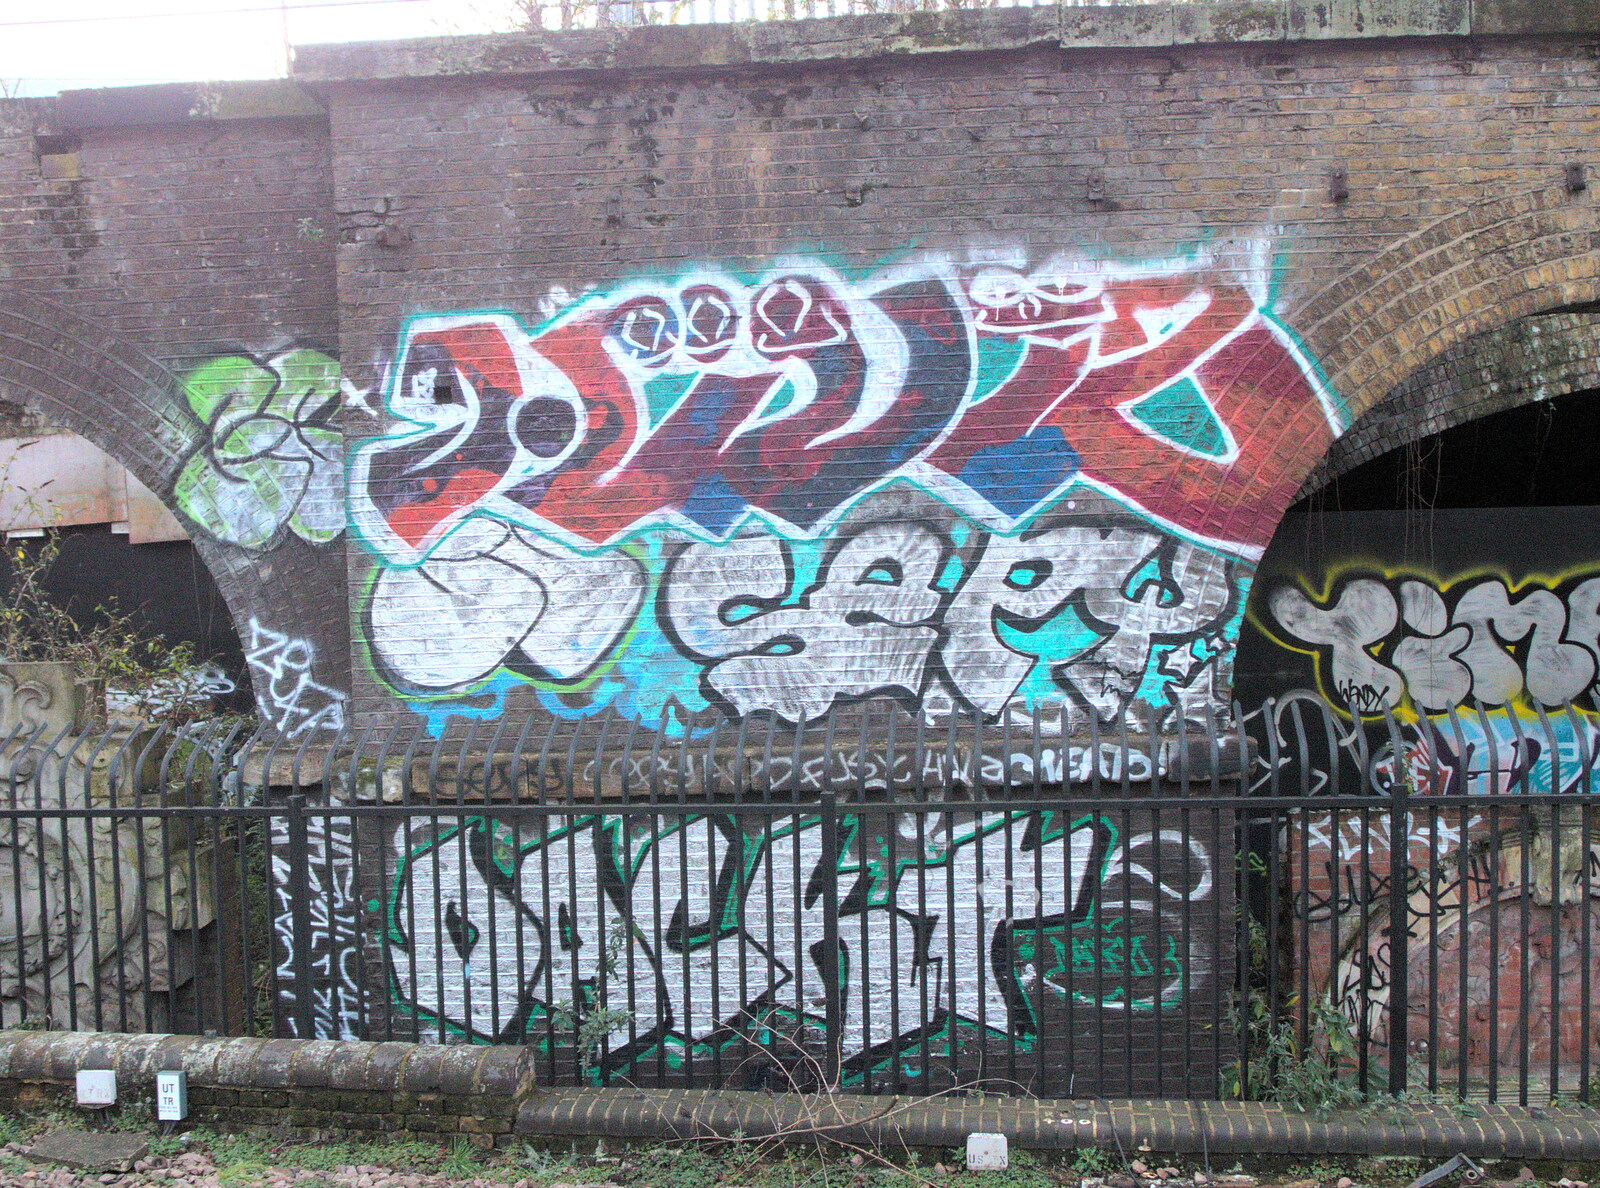 More colourful tags from Railway Graffiti, Tower Hamlets, London - 12th February 2019